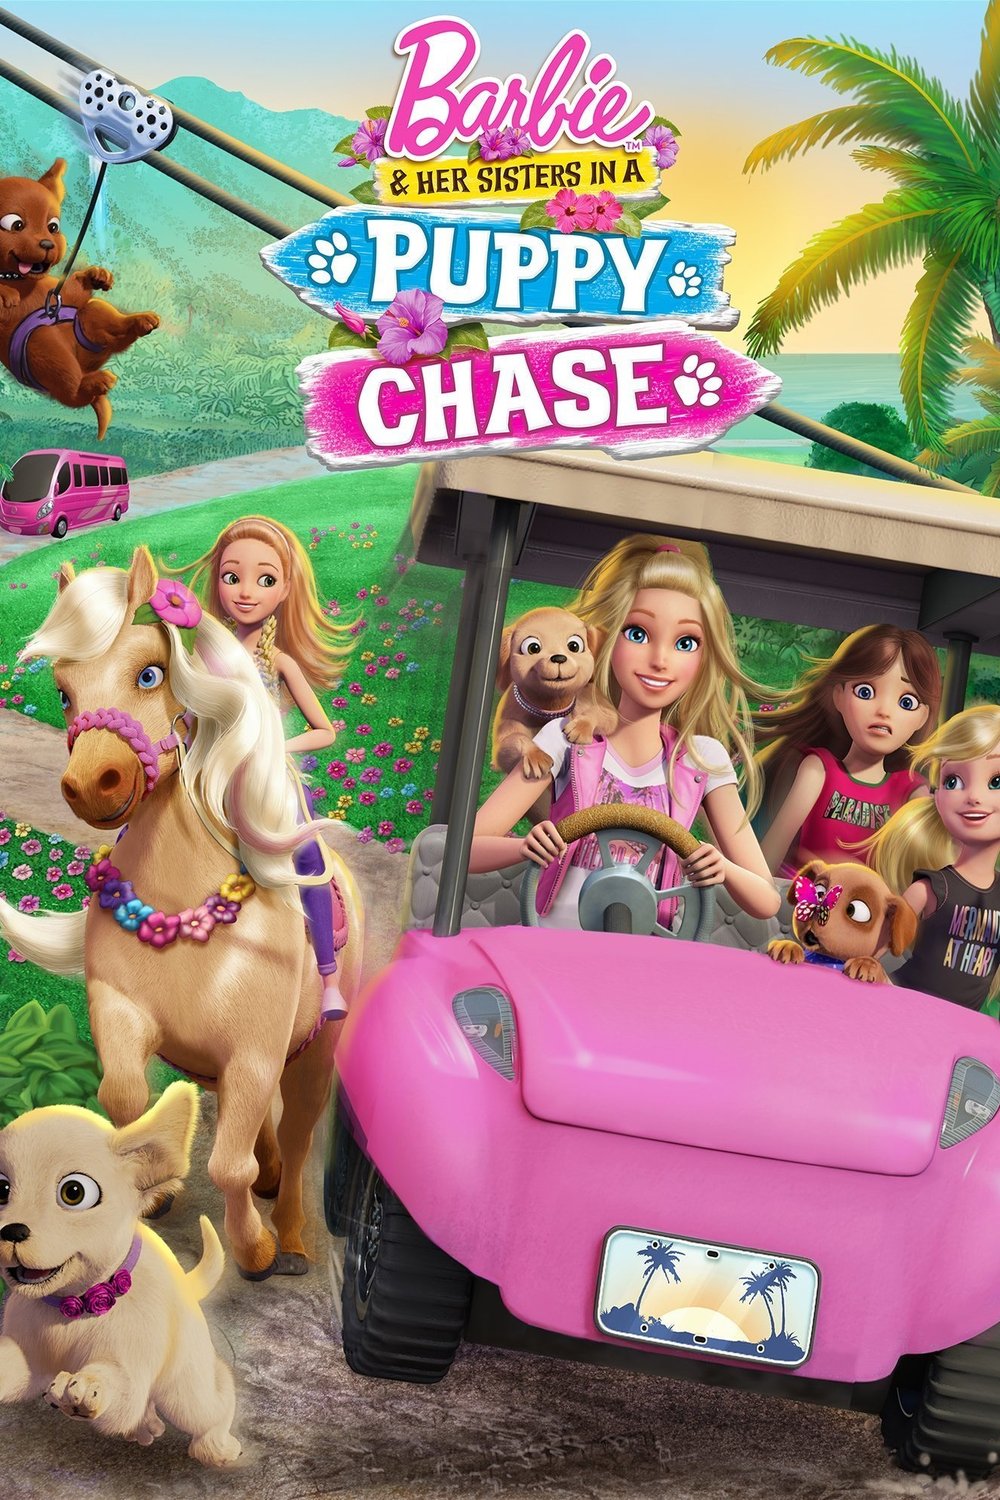 Poster of the movie Barbie & Her Sisters in a Puppy Chase